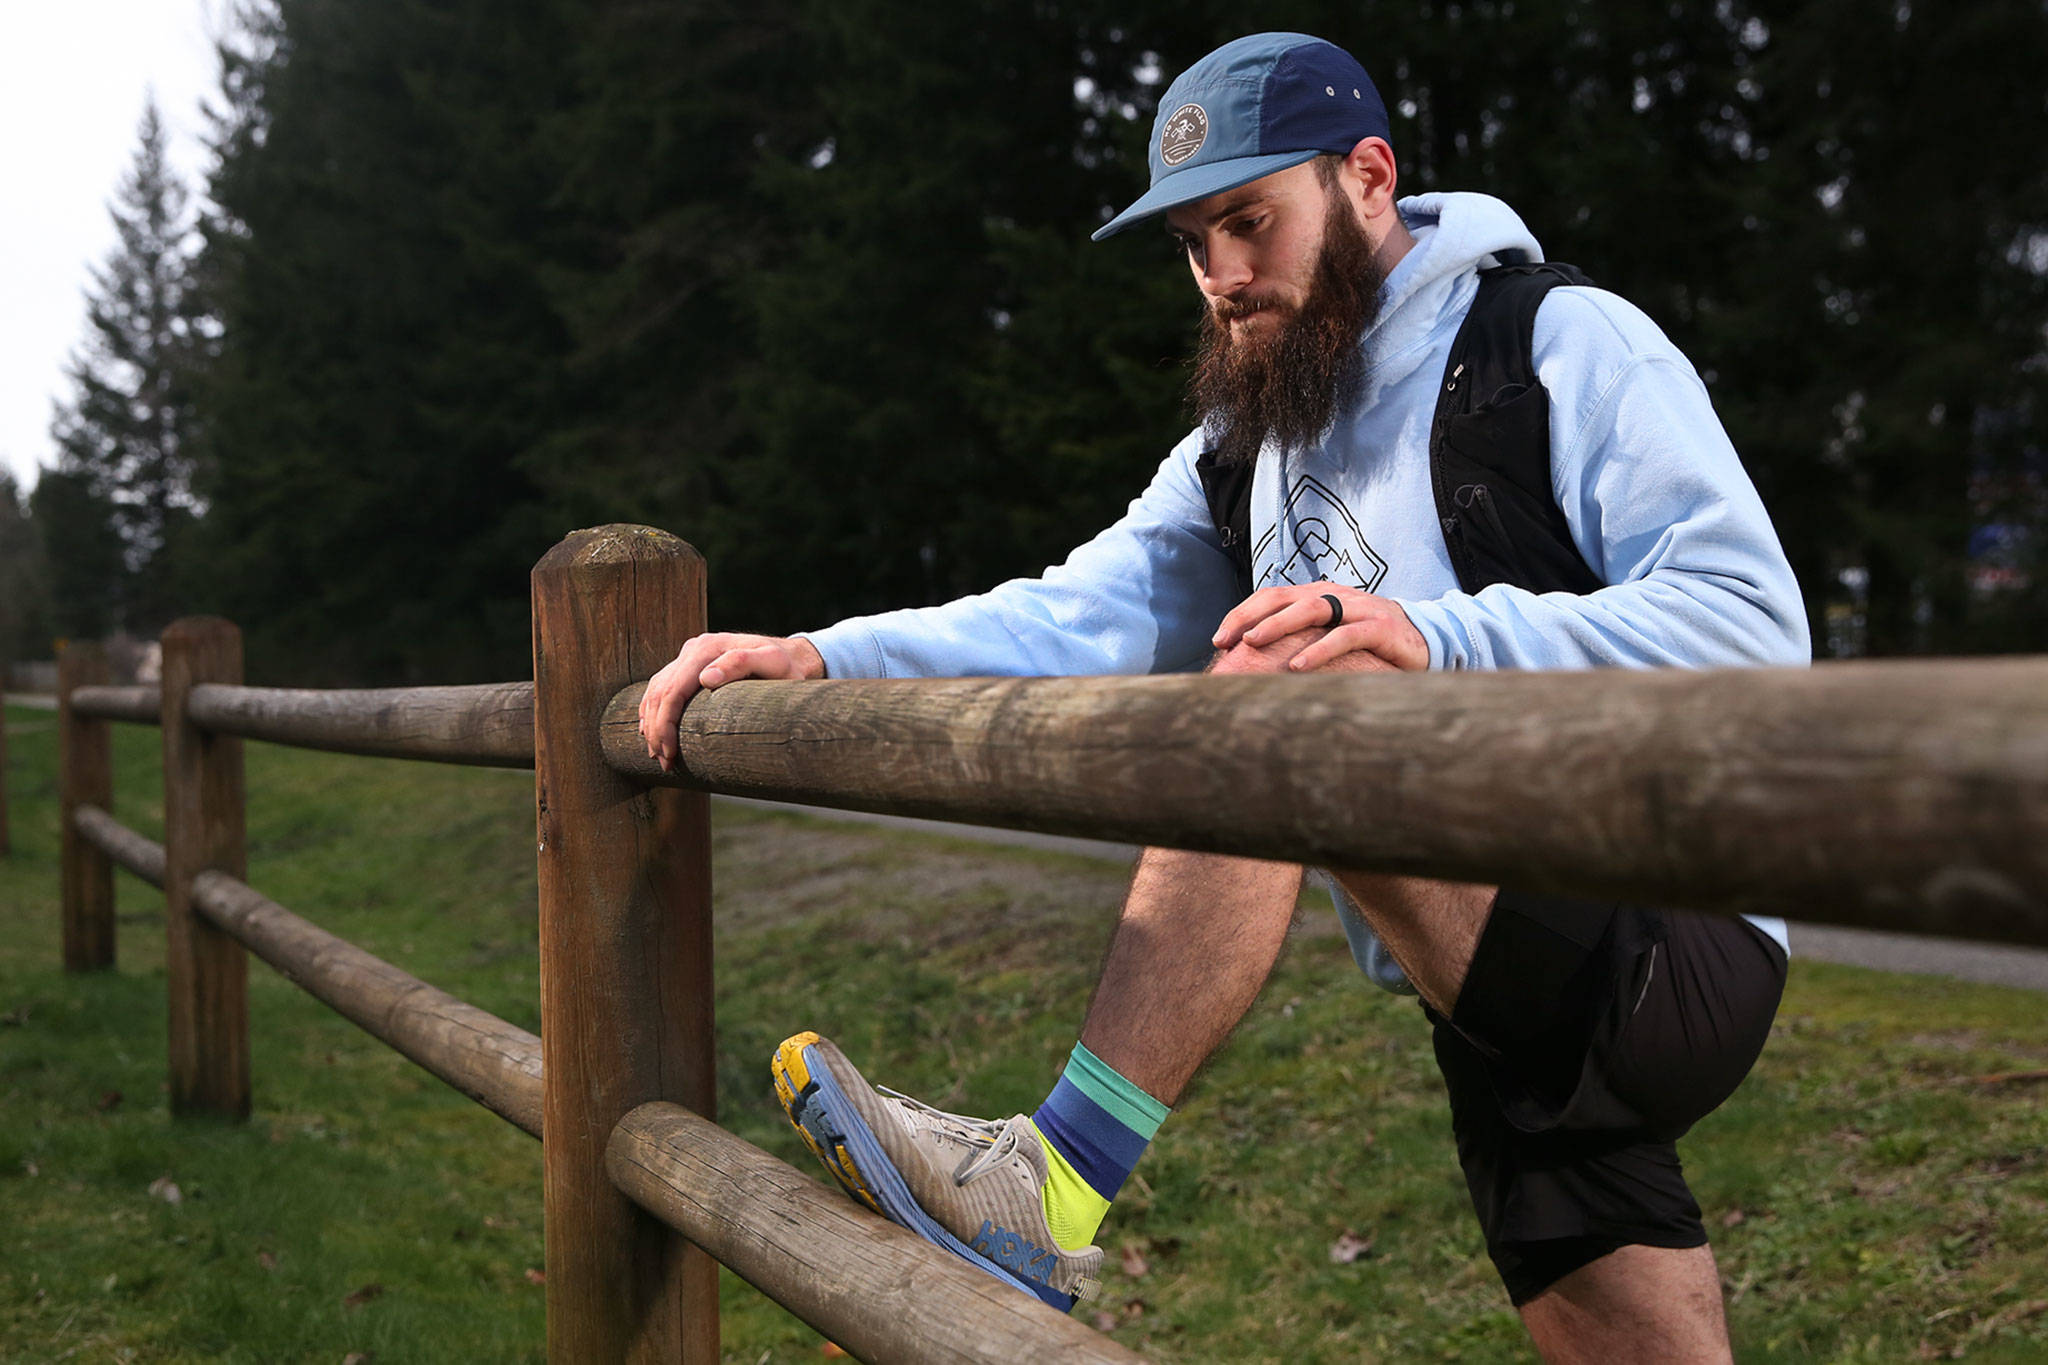 Austin Johnson, 26, trains on the Centennial Trail in Lake Stevens and is planning to do a 24-hour run to raise money for the American Foundation for Suicide Prevention. (Kevin Clark / The Herald)